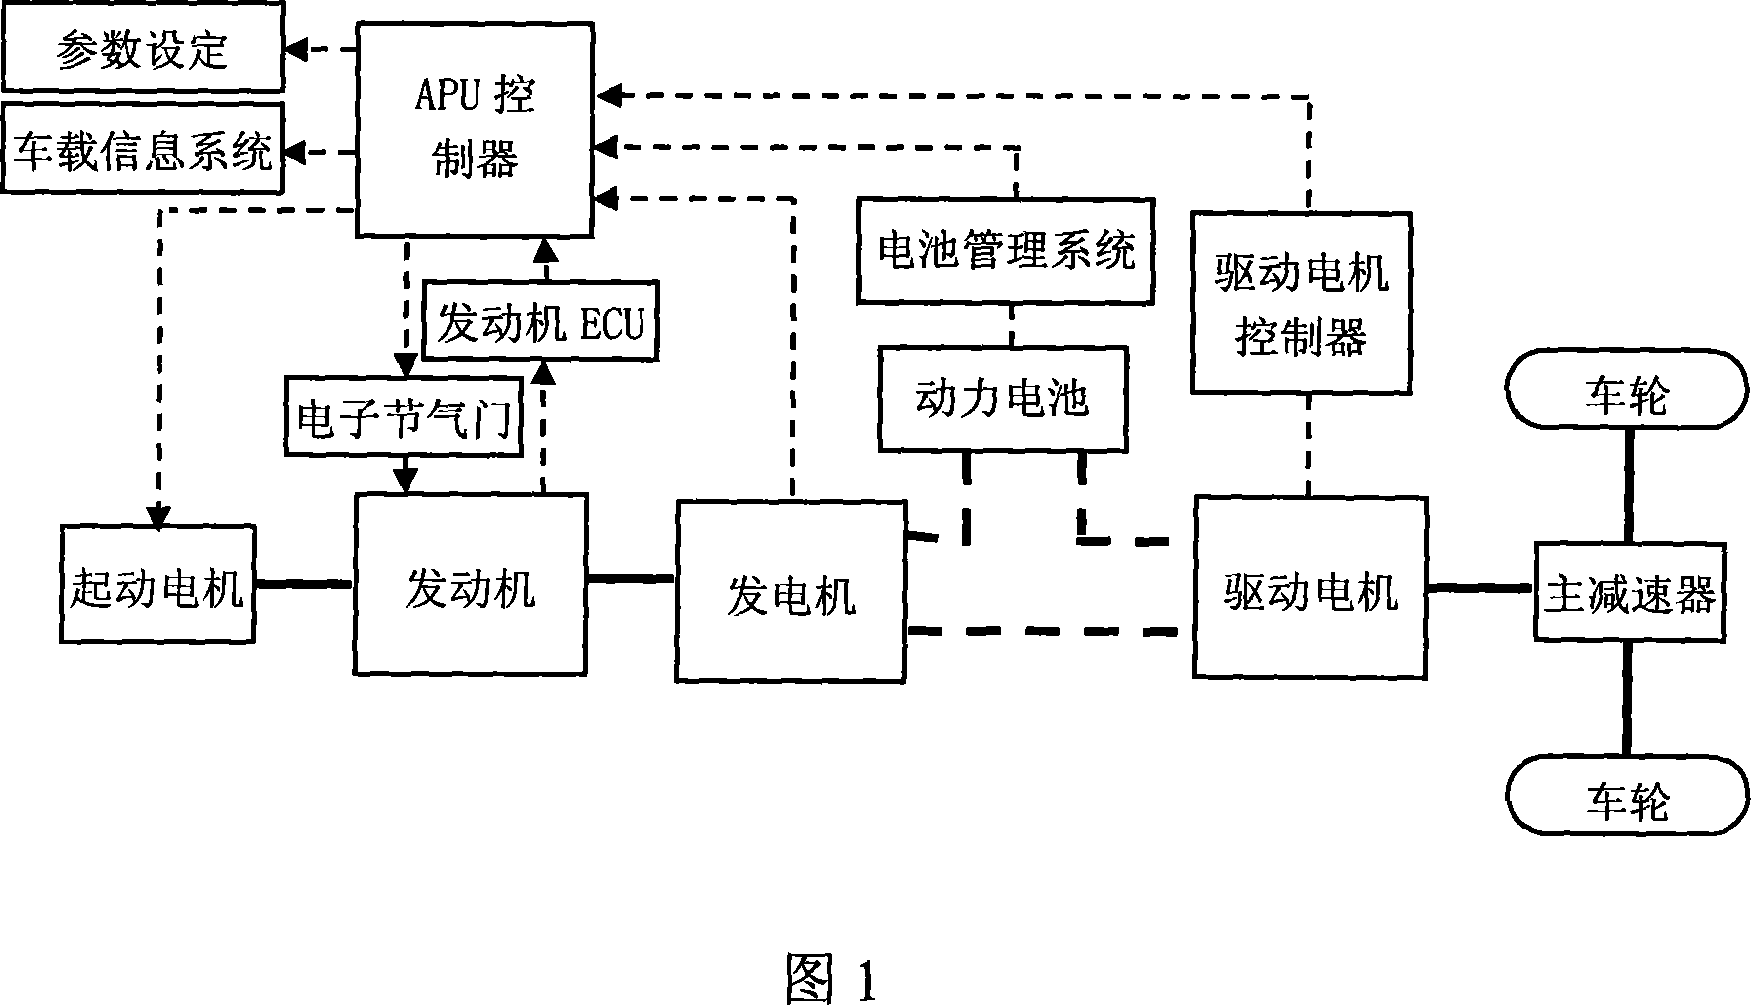 Control method of auxiliary power unit in serially connected nixed power electromobile